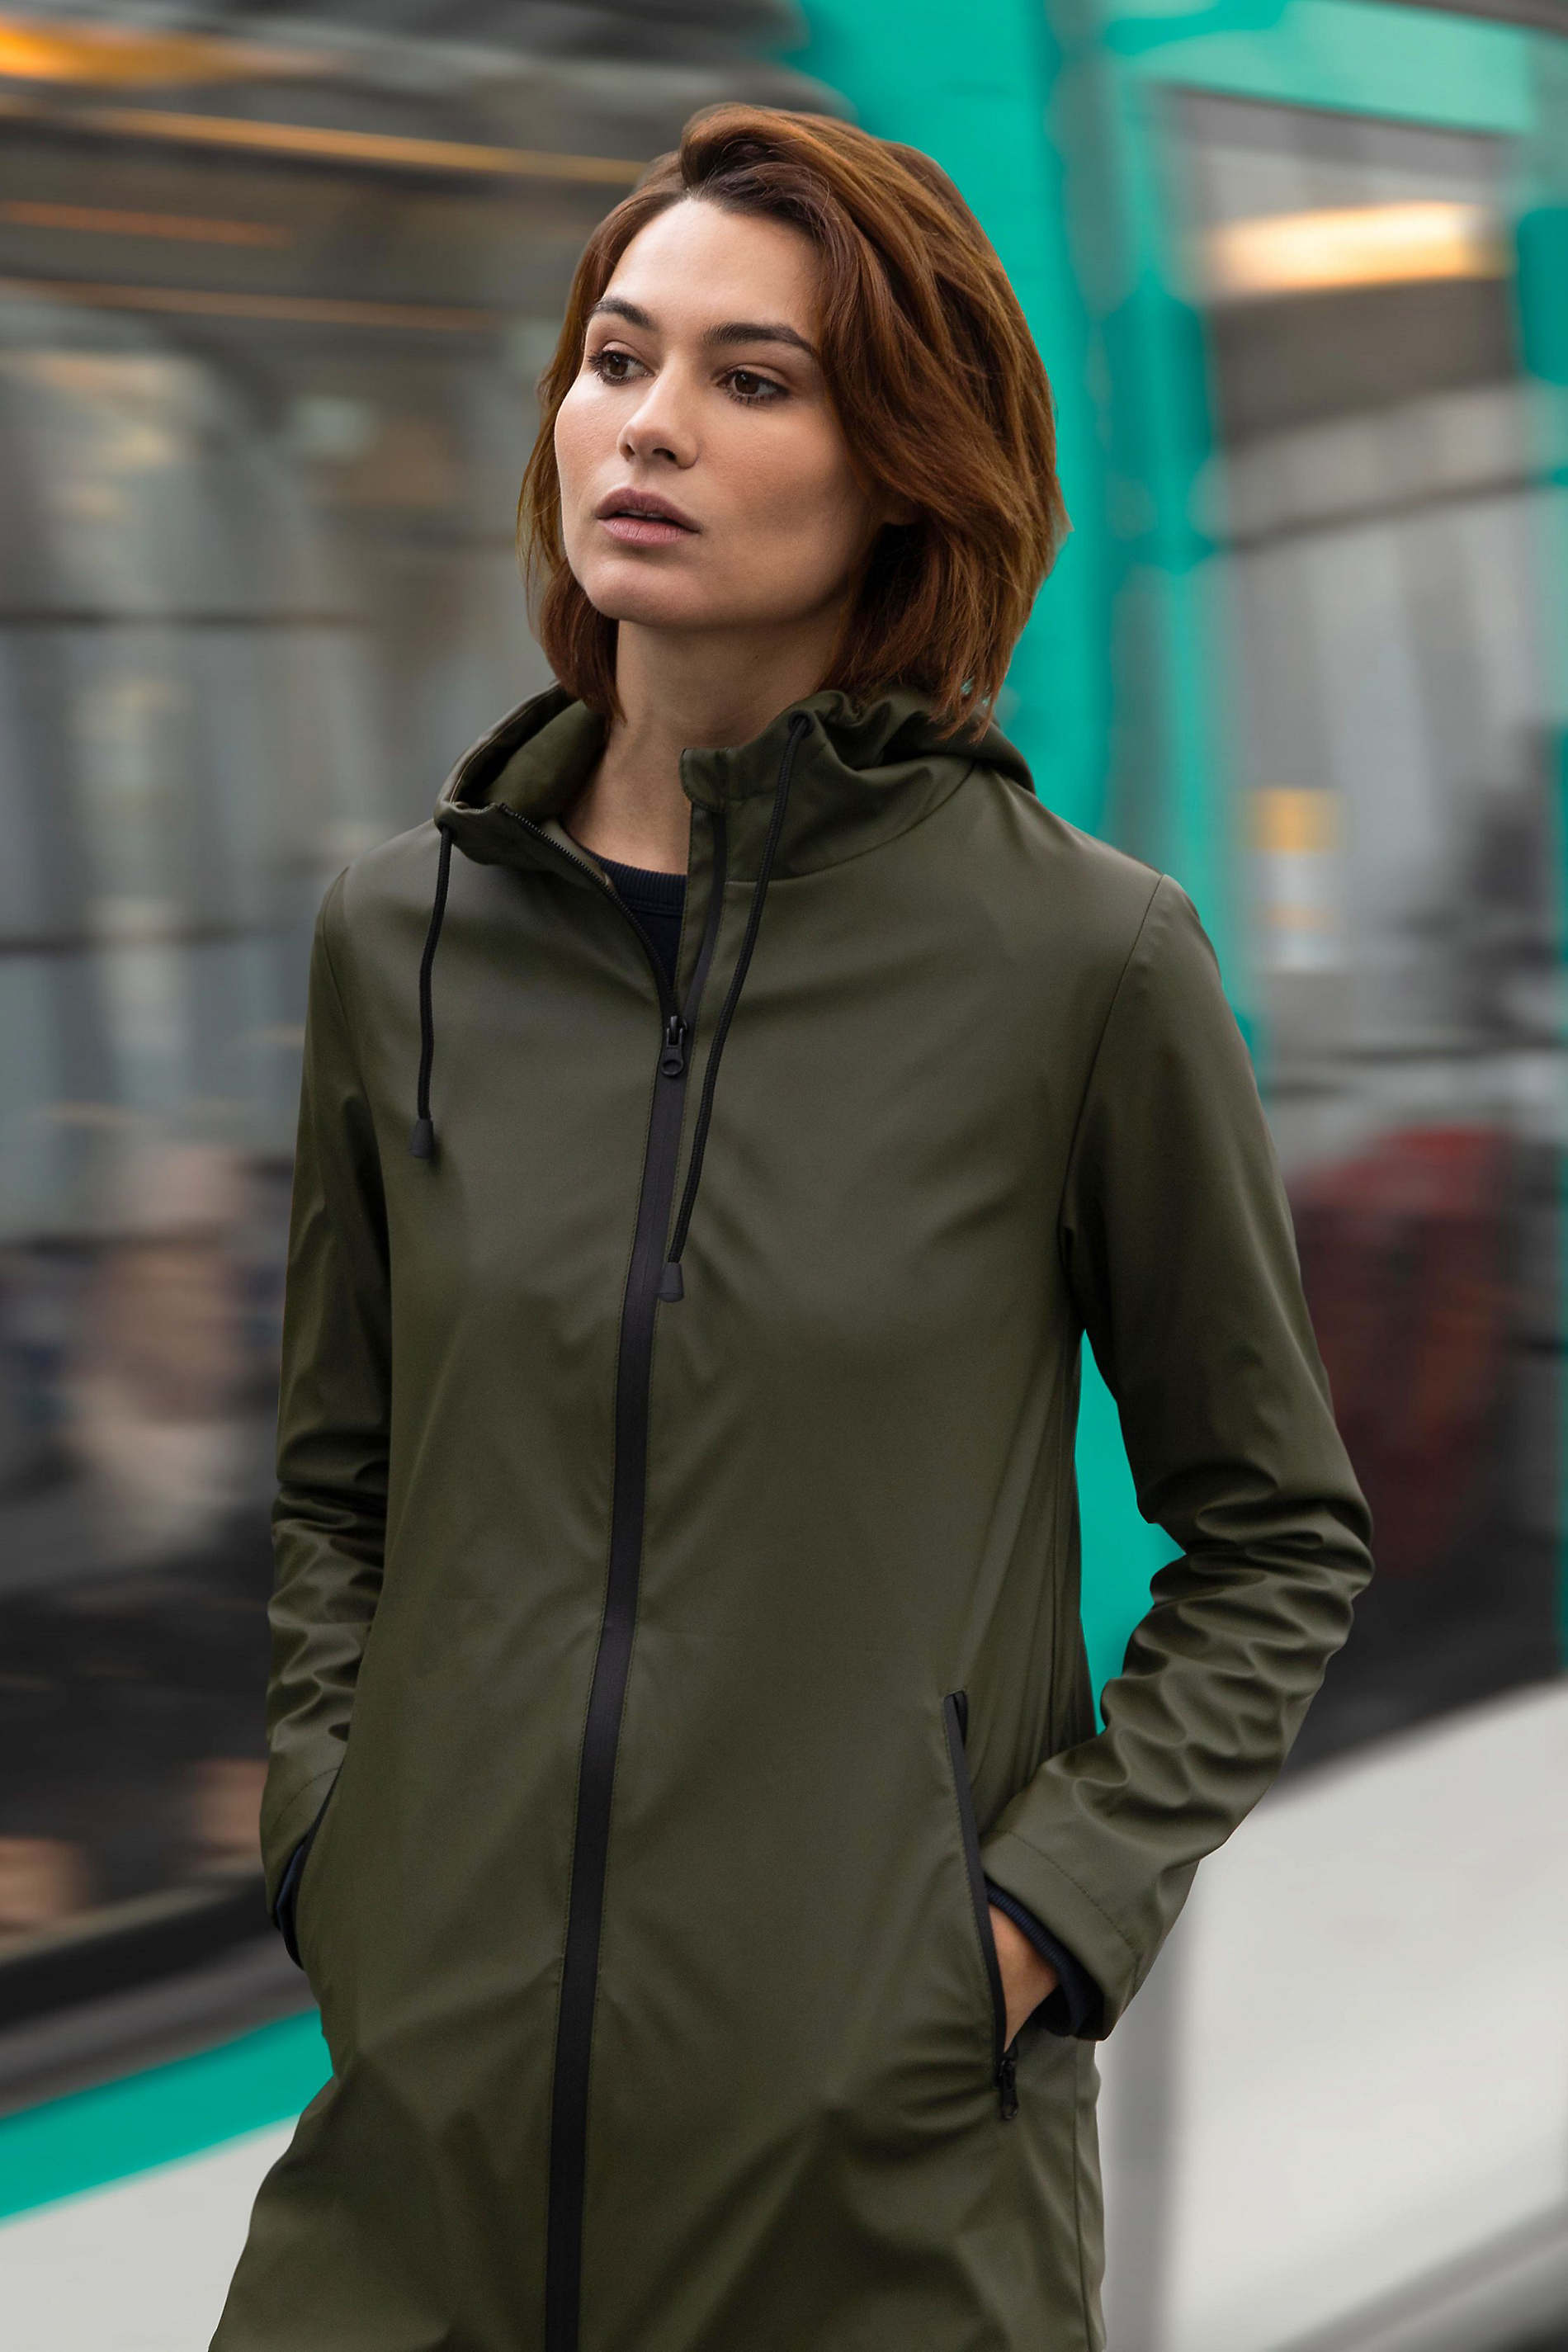 WOMEN'S WATERPROOF WAXED JACKET<p>This revisited waxed jacket is an iconic garment that combines performance and modernity. Its waterproof finishes make it perfectly impermeable and its matt look gives it a modern style.</p> NEOBLU ANTOINE WOMEN